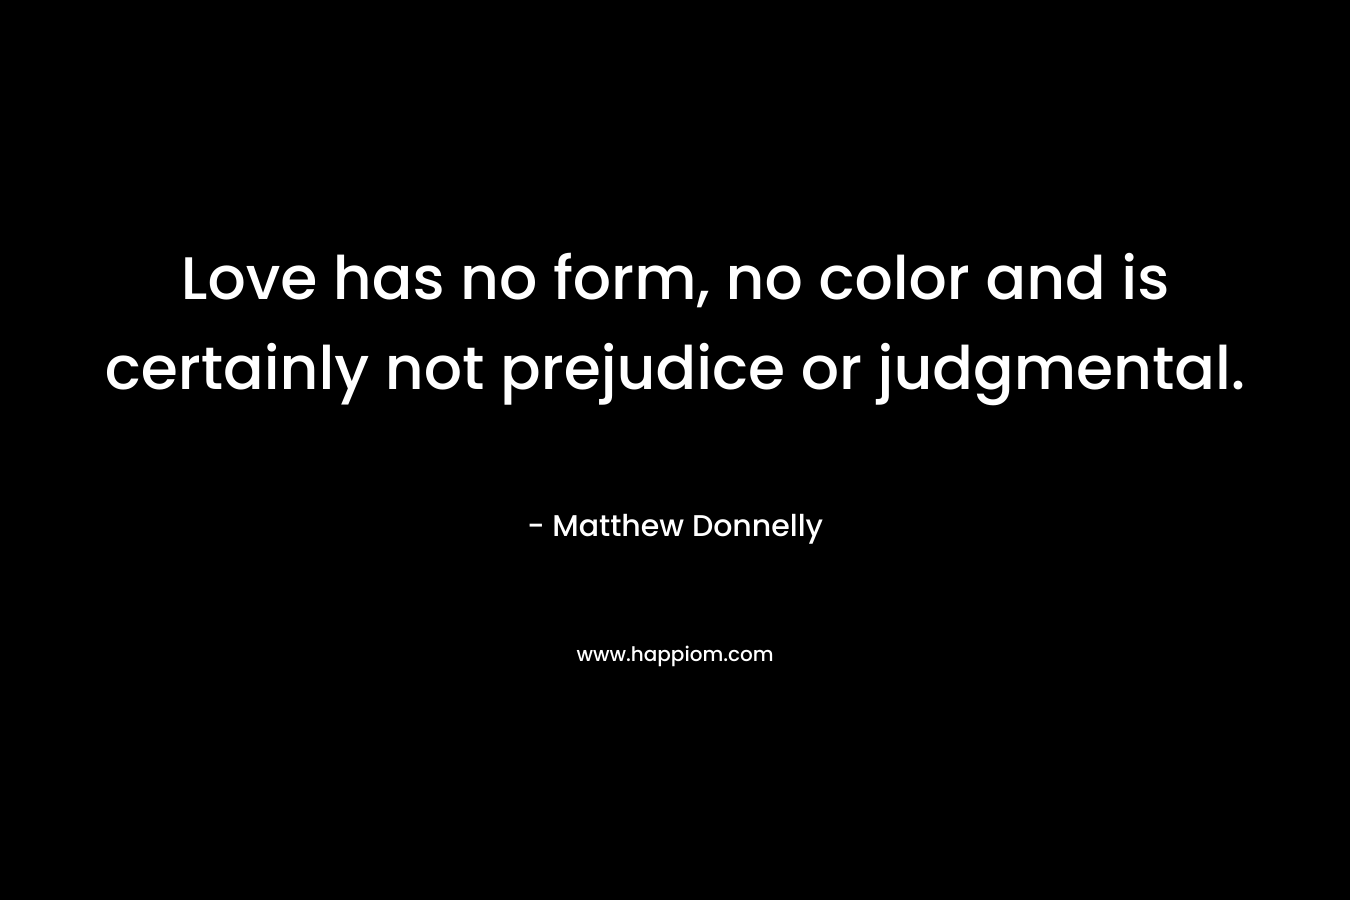 Love has no form, no color and is certainly not prejudice or judgmental. – Matthew Donnelly